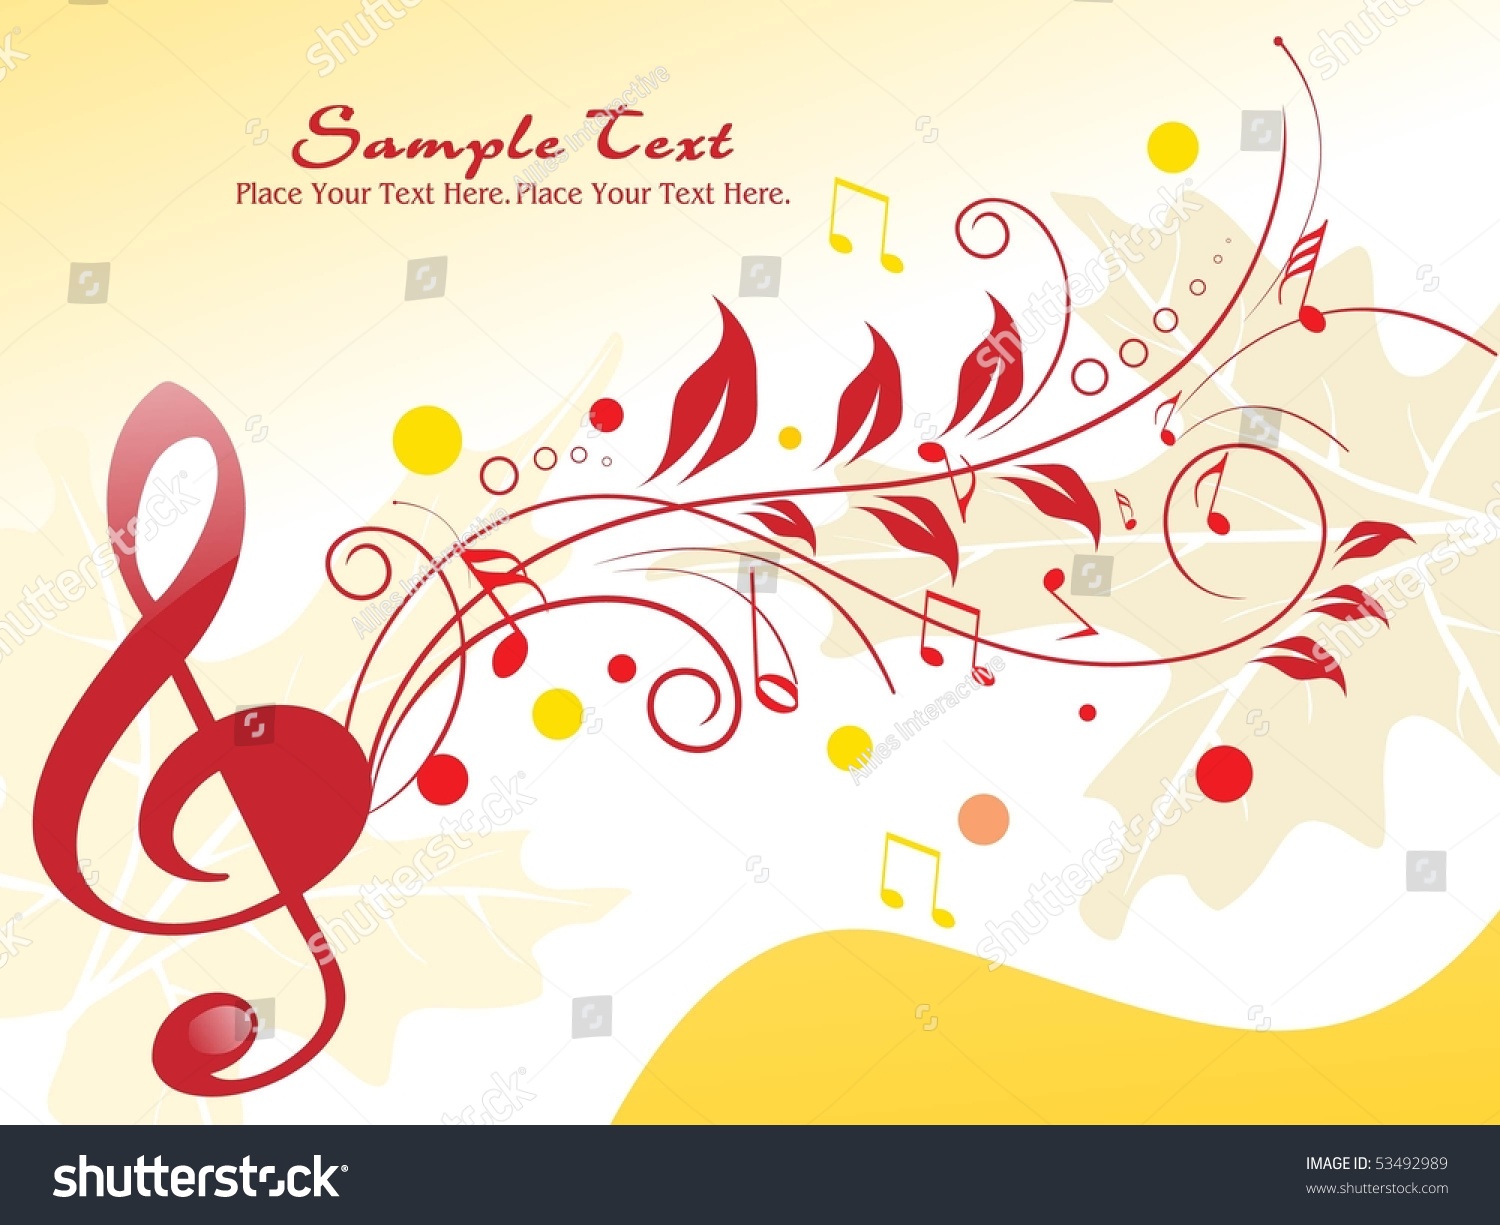 Abstract Floral, Autumn Leaf Background With Musical Notes Stock Vector ...